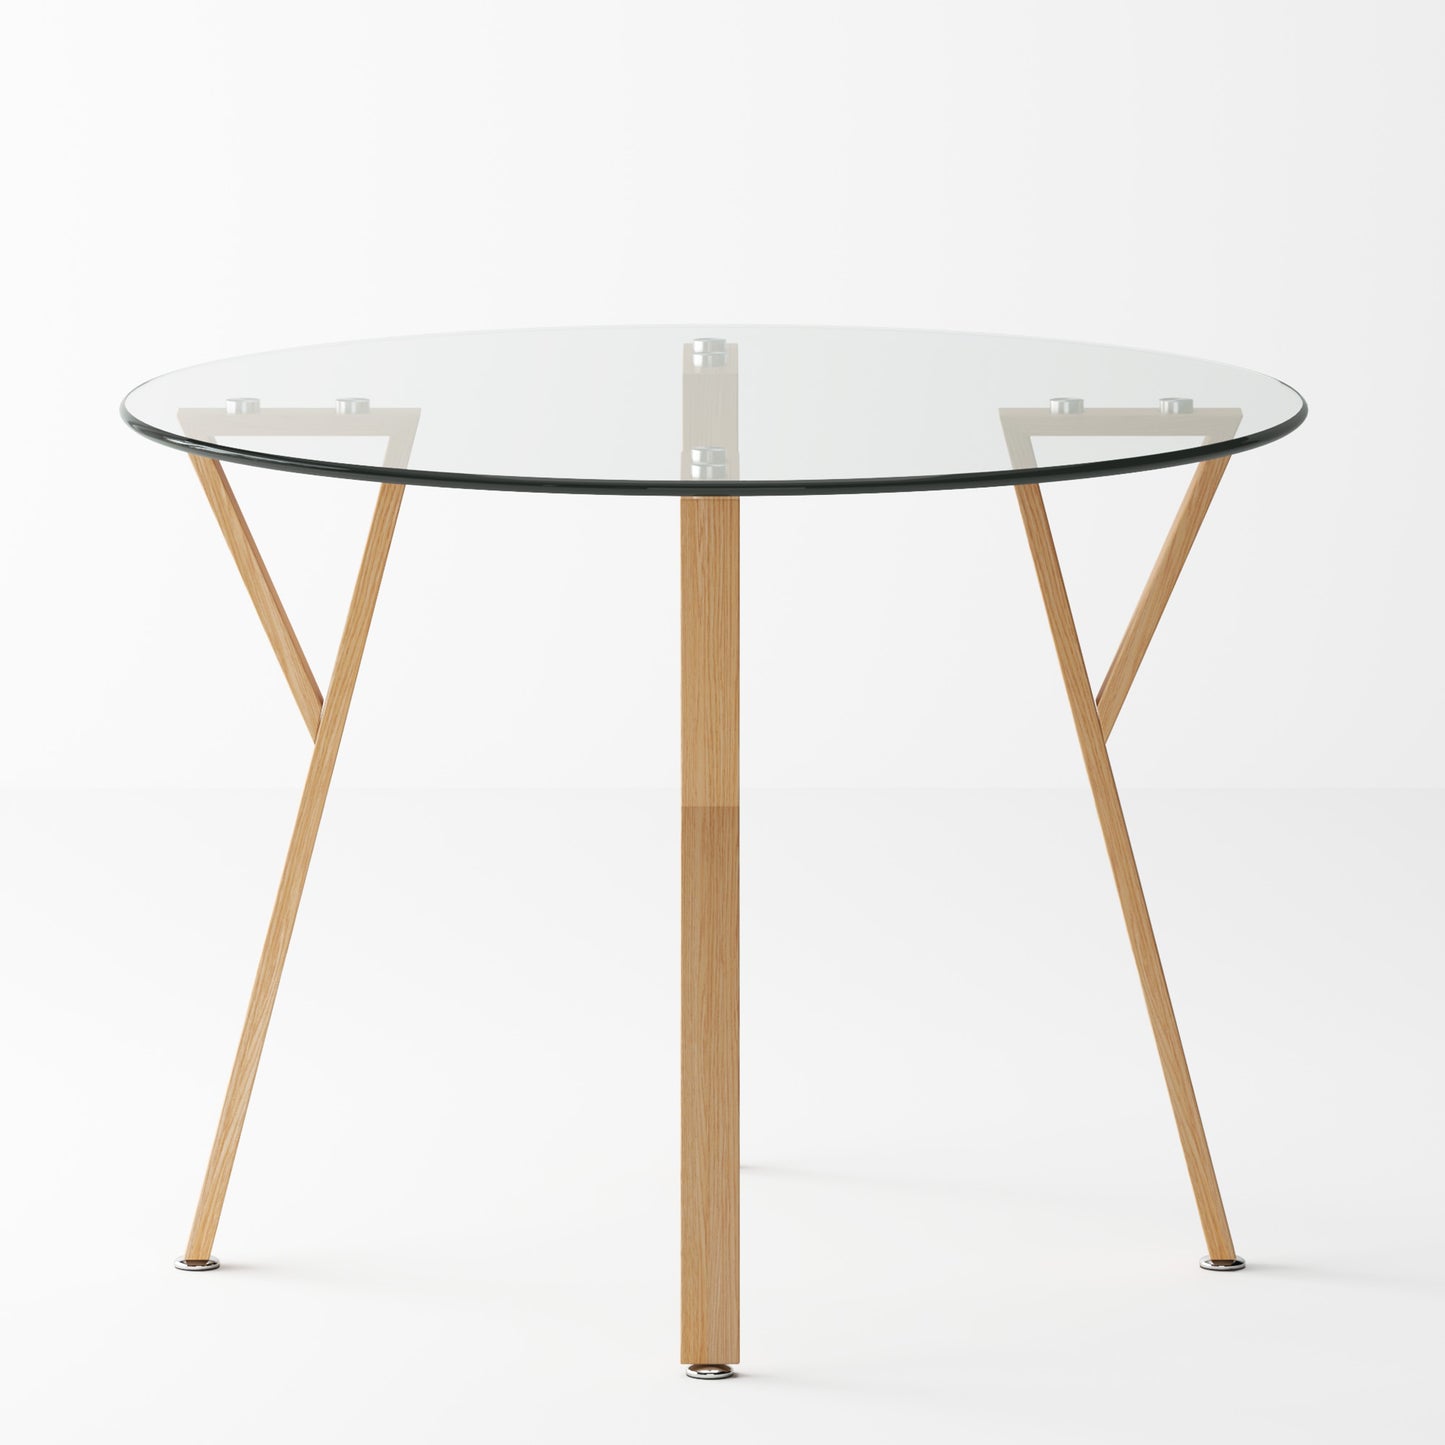 SogesPower φ39“ Tempered Glass Round Dining Table- Oak